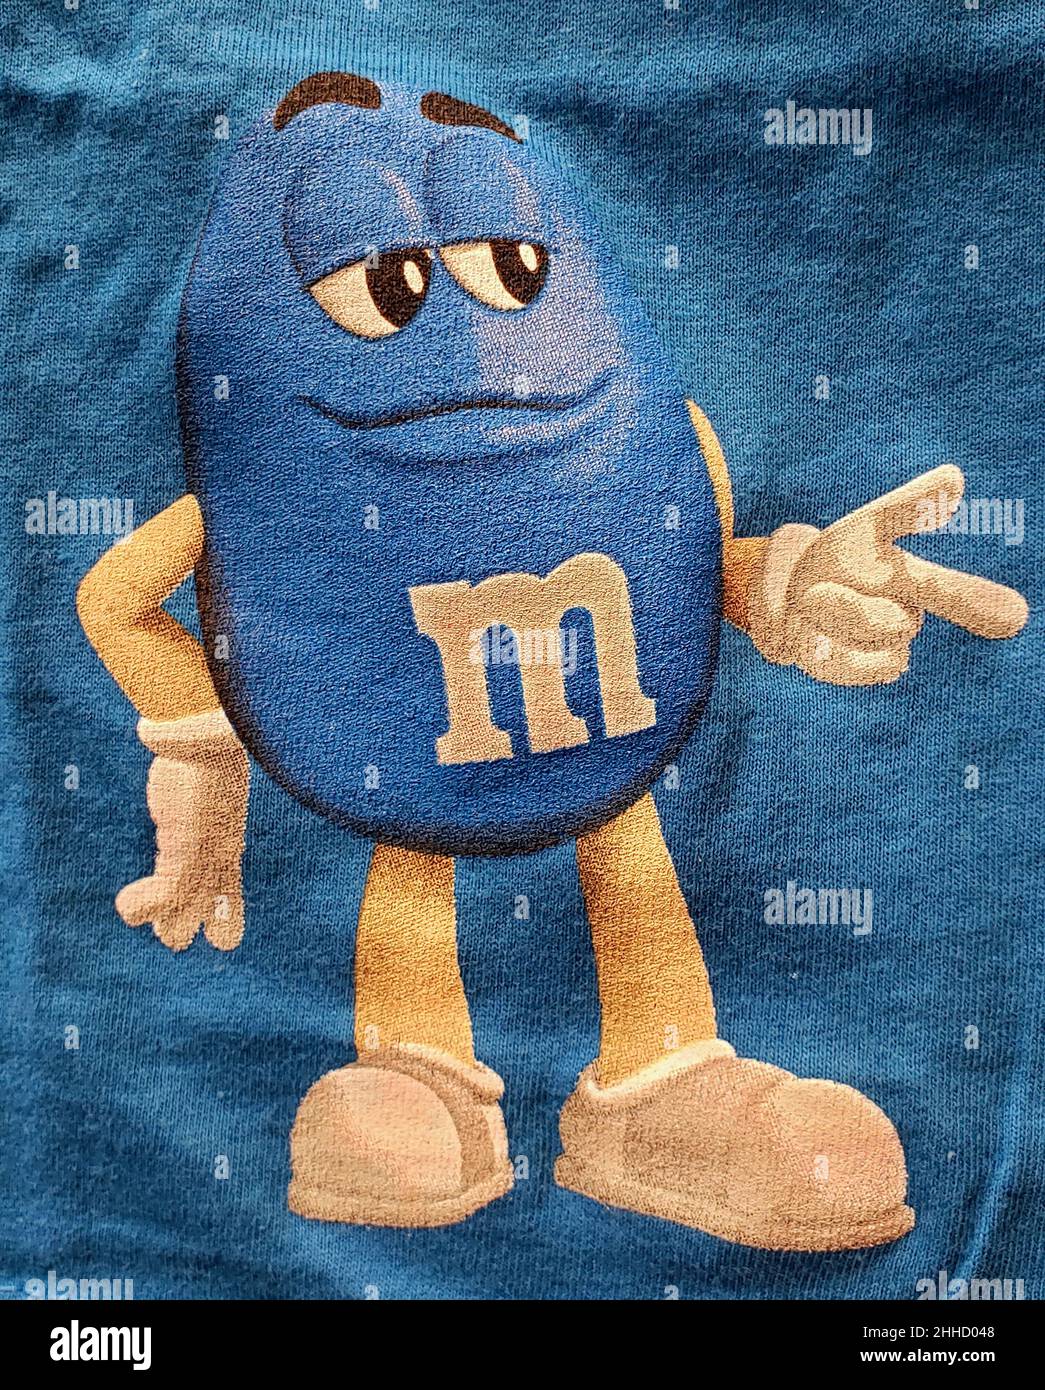 Pinterest  M&m characters, Character wallpaper, Red and blue